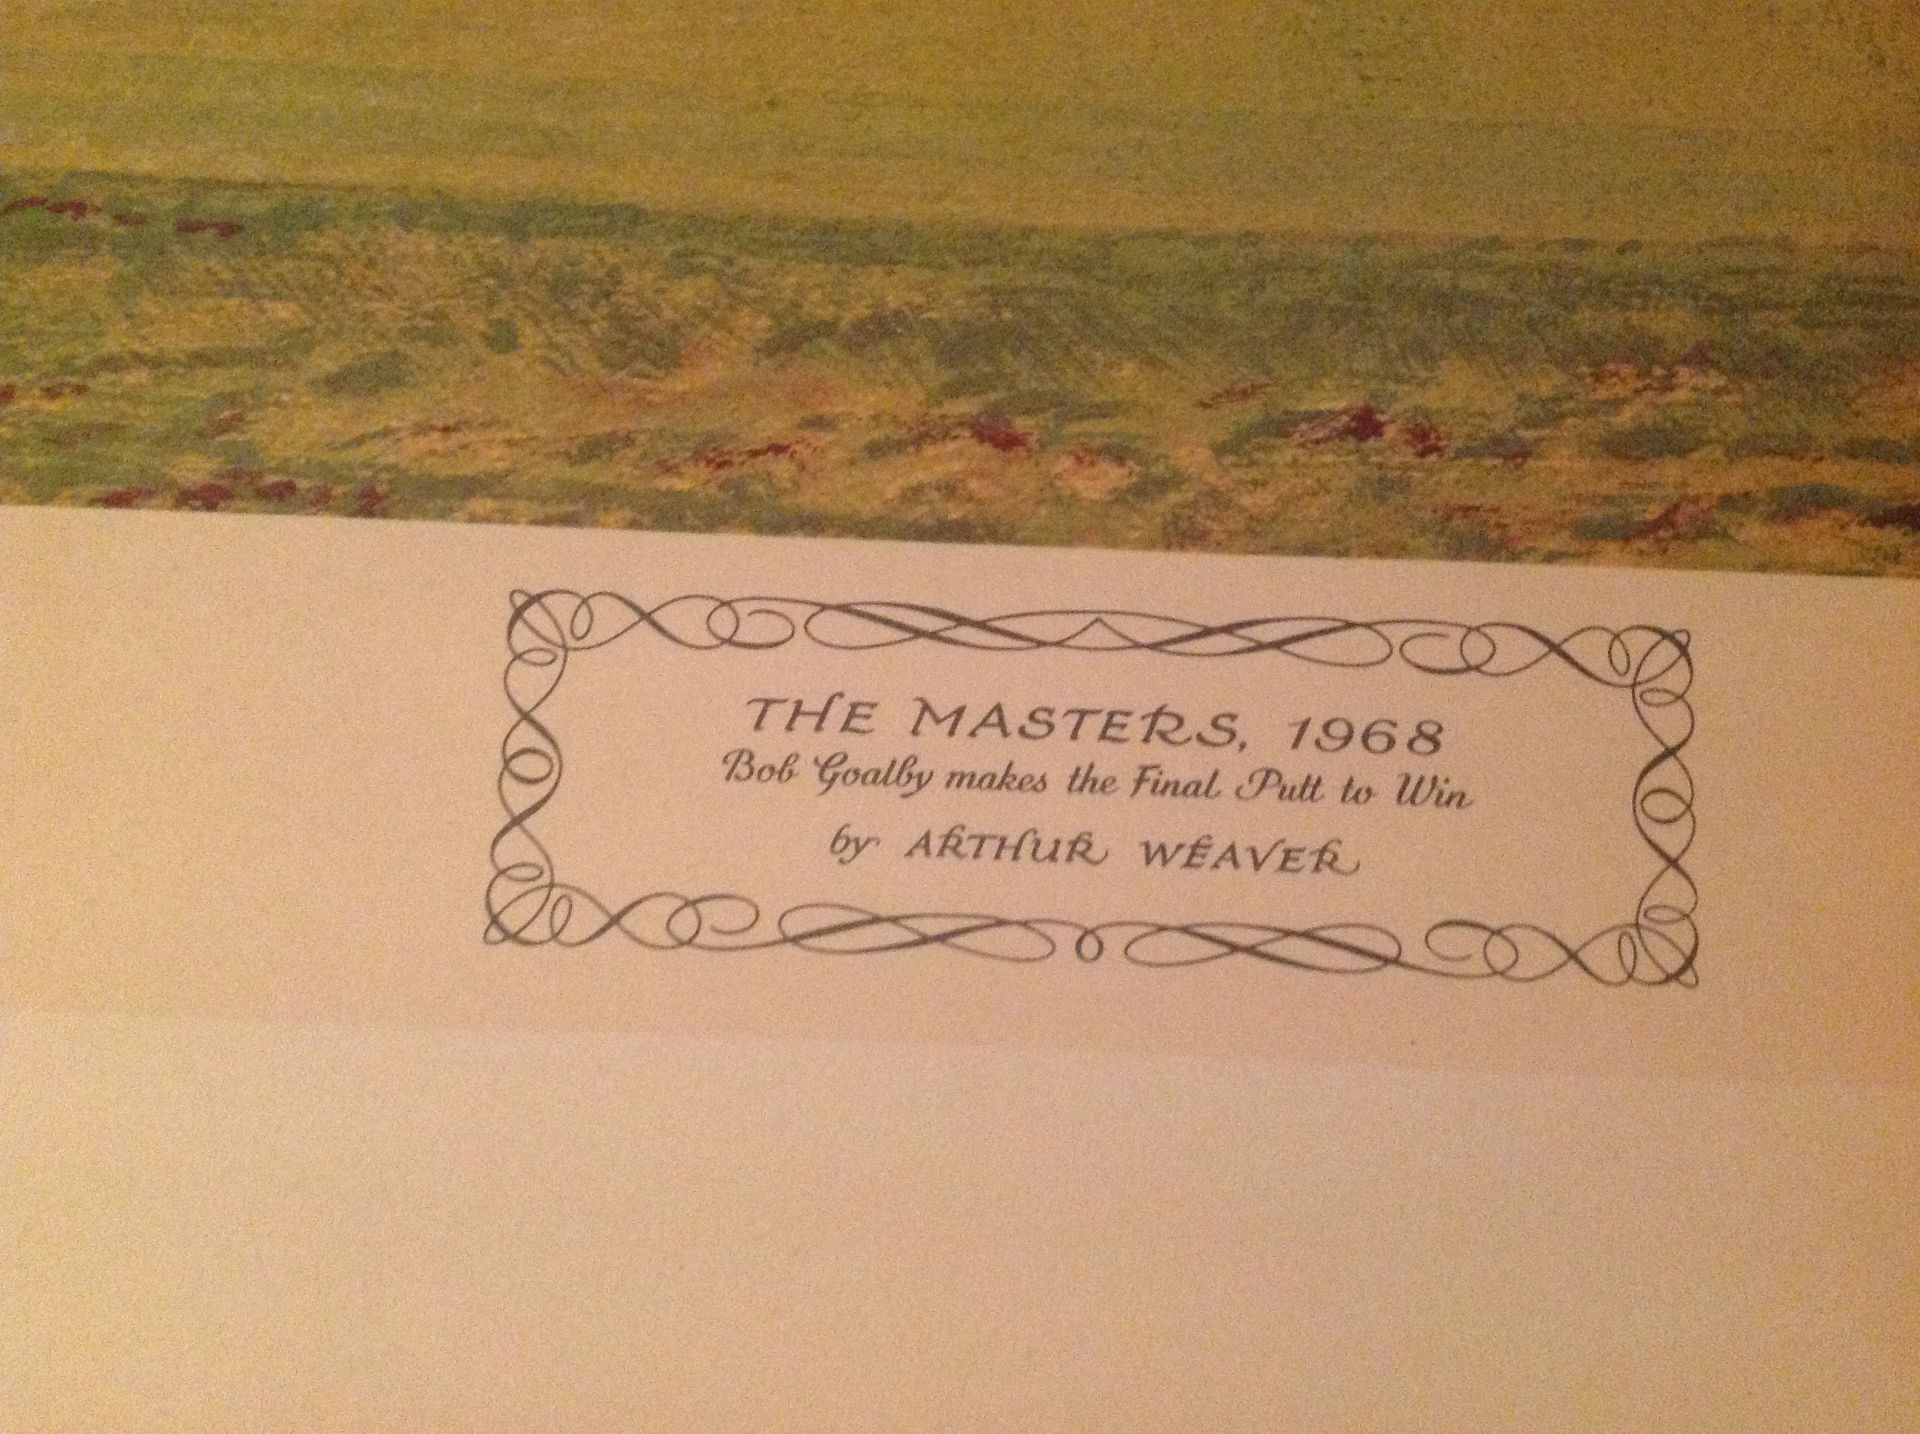 Arthur Weaver Signed print The Masters 1968 “Bob Goalby makes the final putt to win” - Image 4 of 4